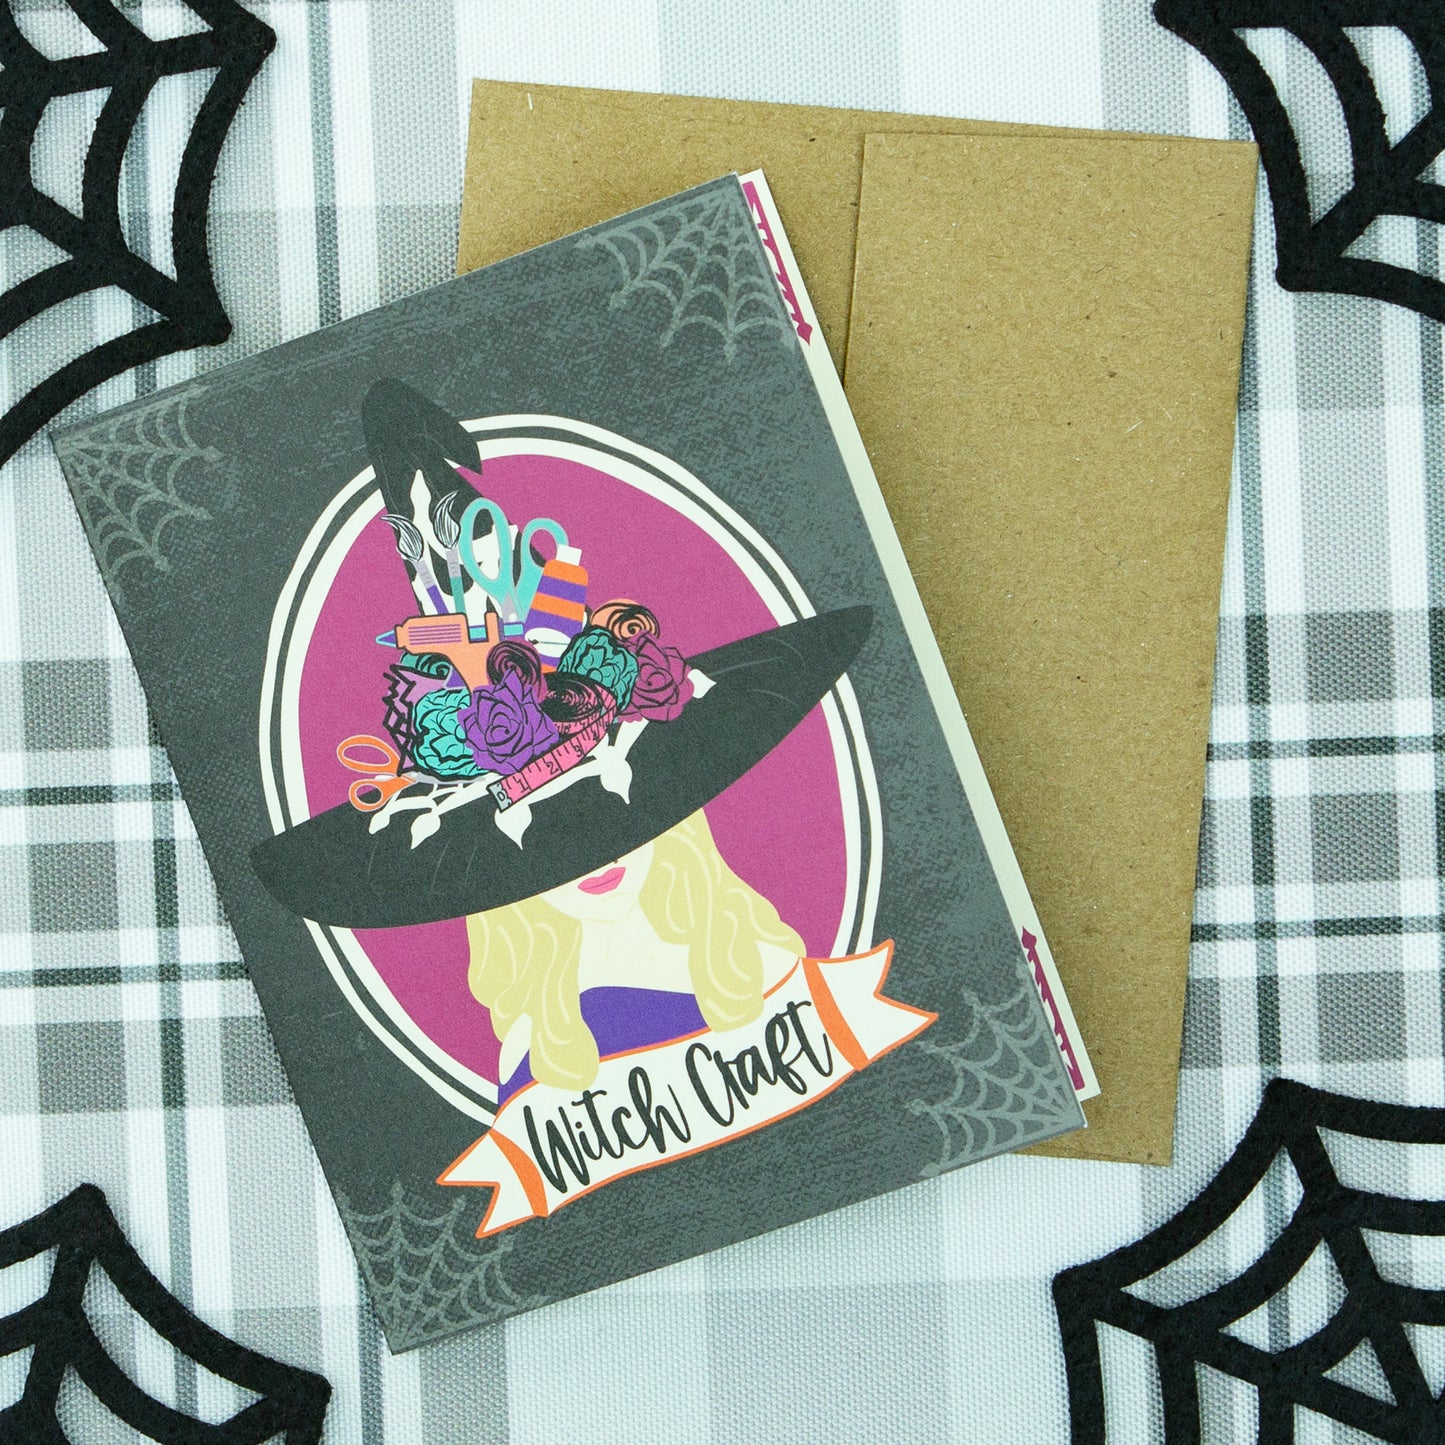 Funny Witch Craft Halloween Greeting Card